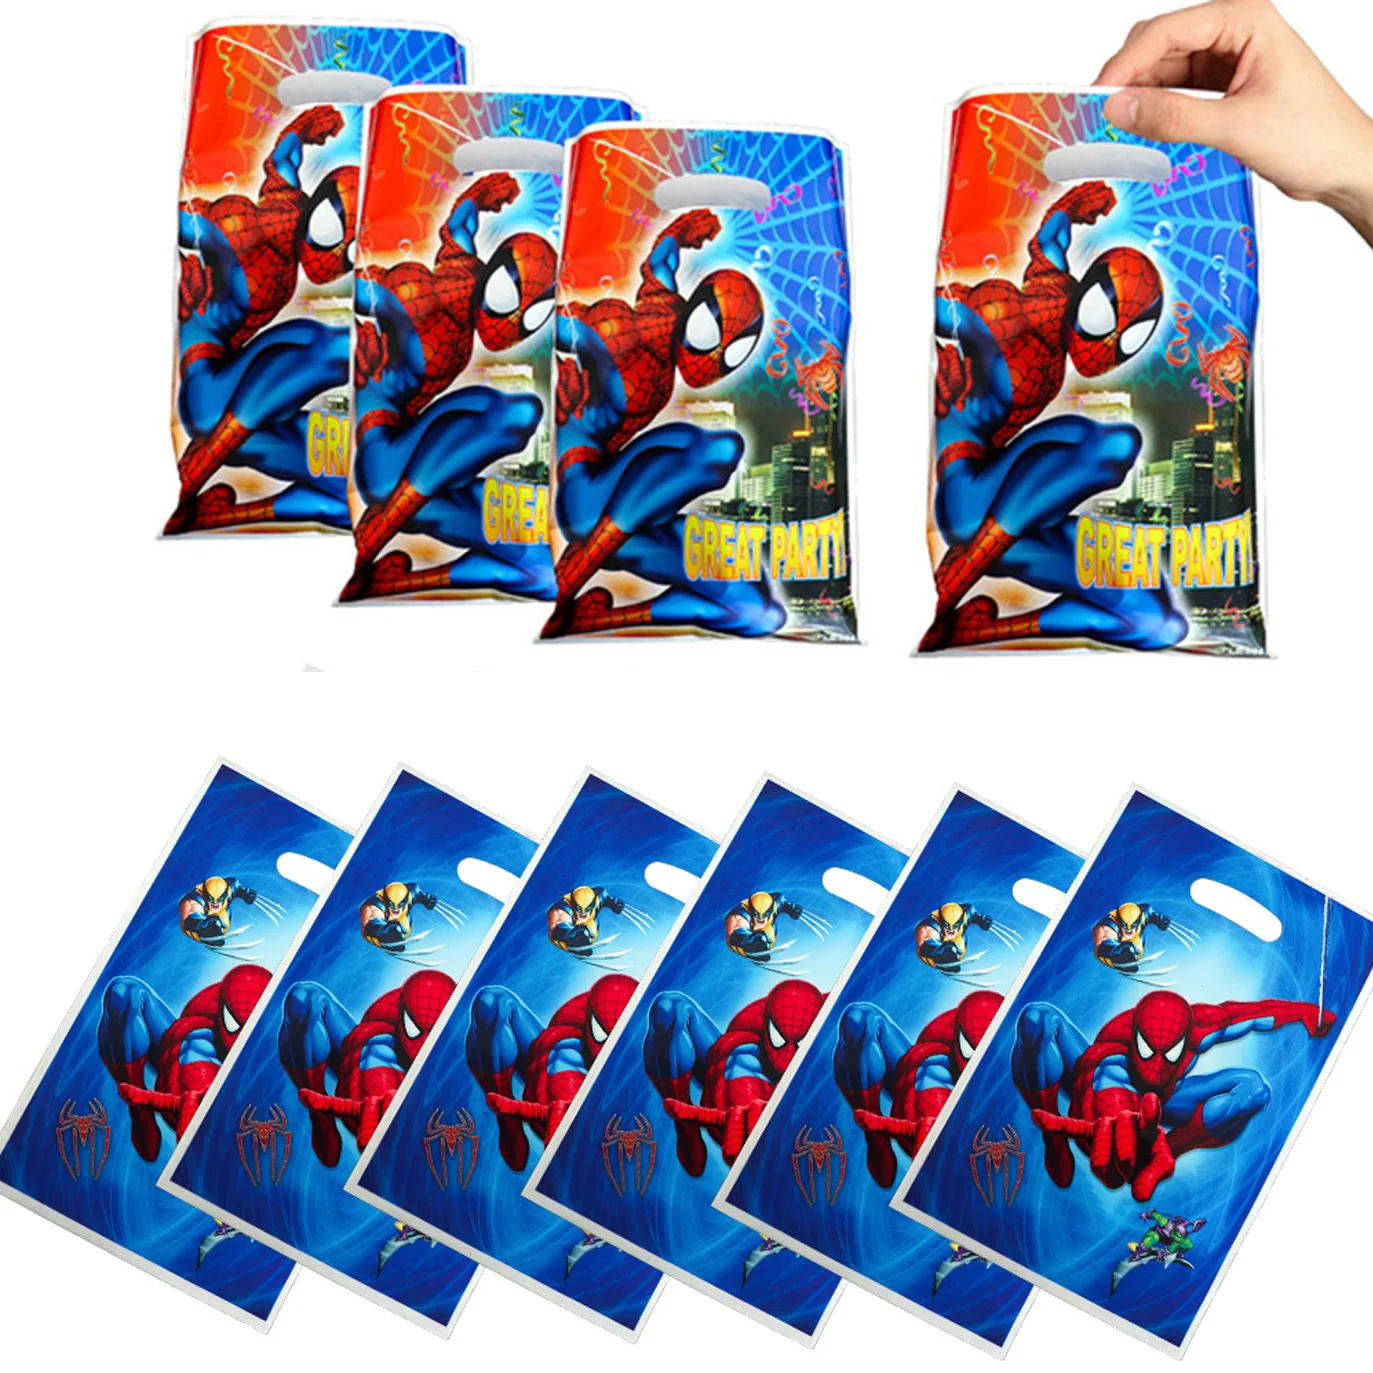 

Spiderman Candy Bag Handle Gift Bags Superhero Themed Birthday Party Decoration Snack Loot Package Festival Party Favor Kids